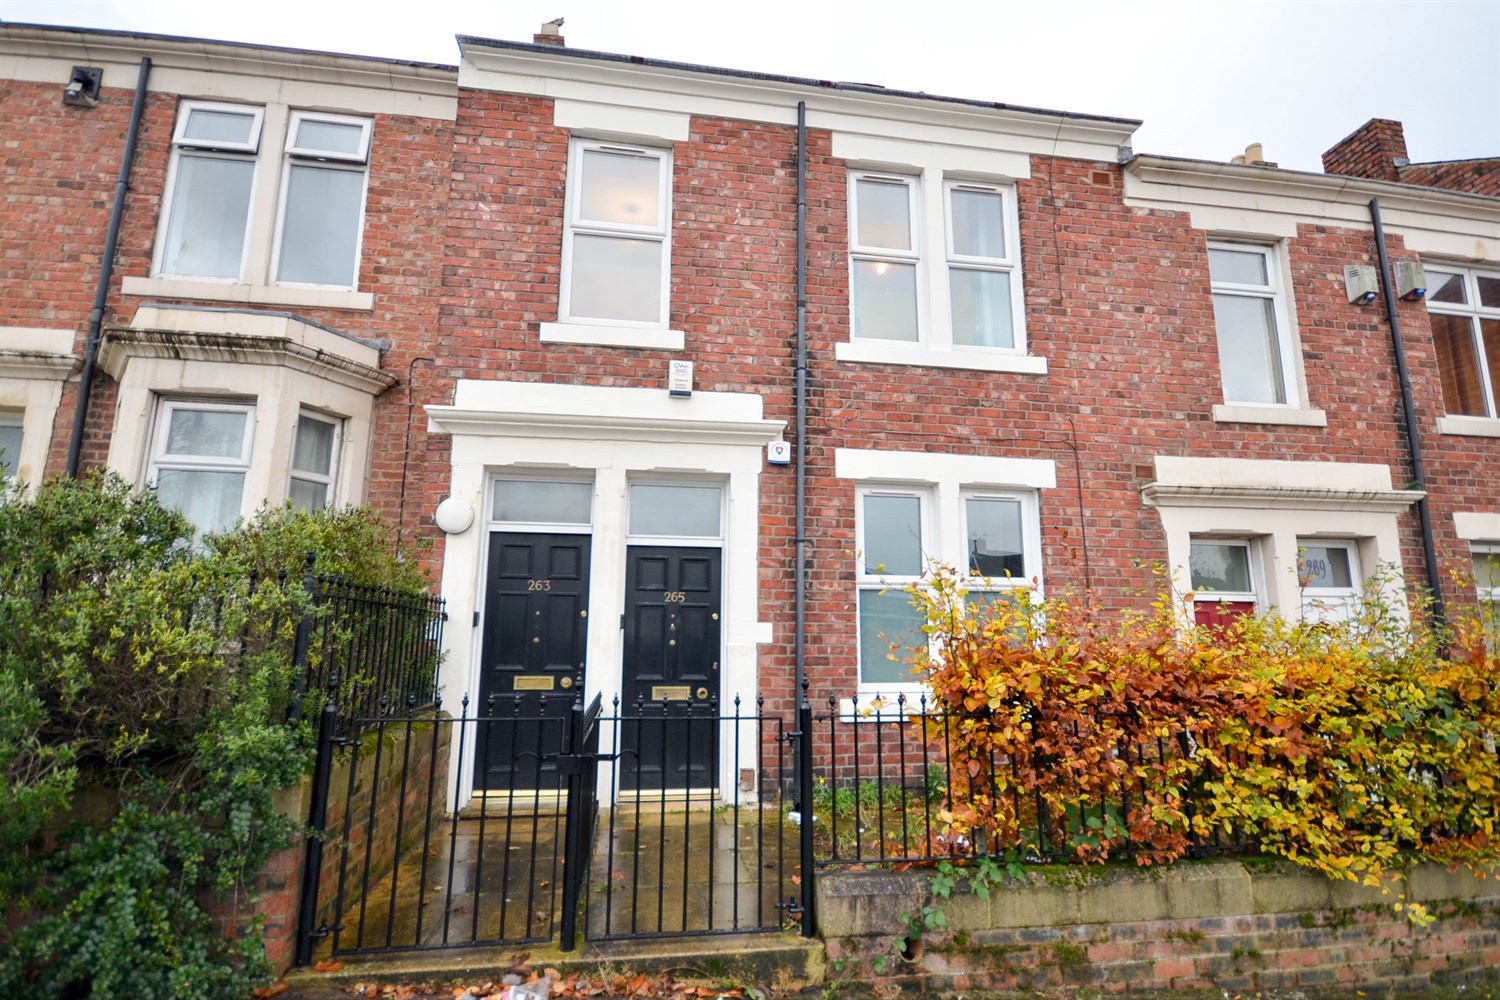 2 bed flat for sale in Whitehall Road, Gateshead - Property Image 1